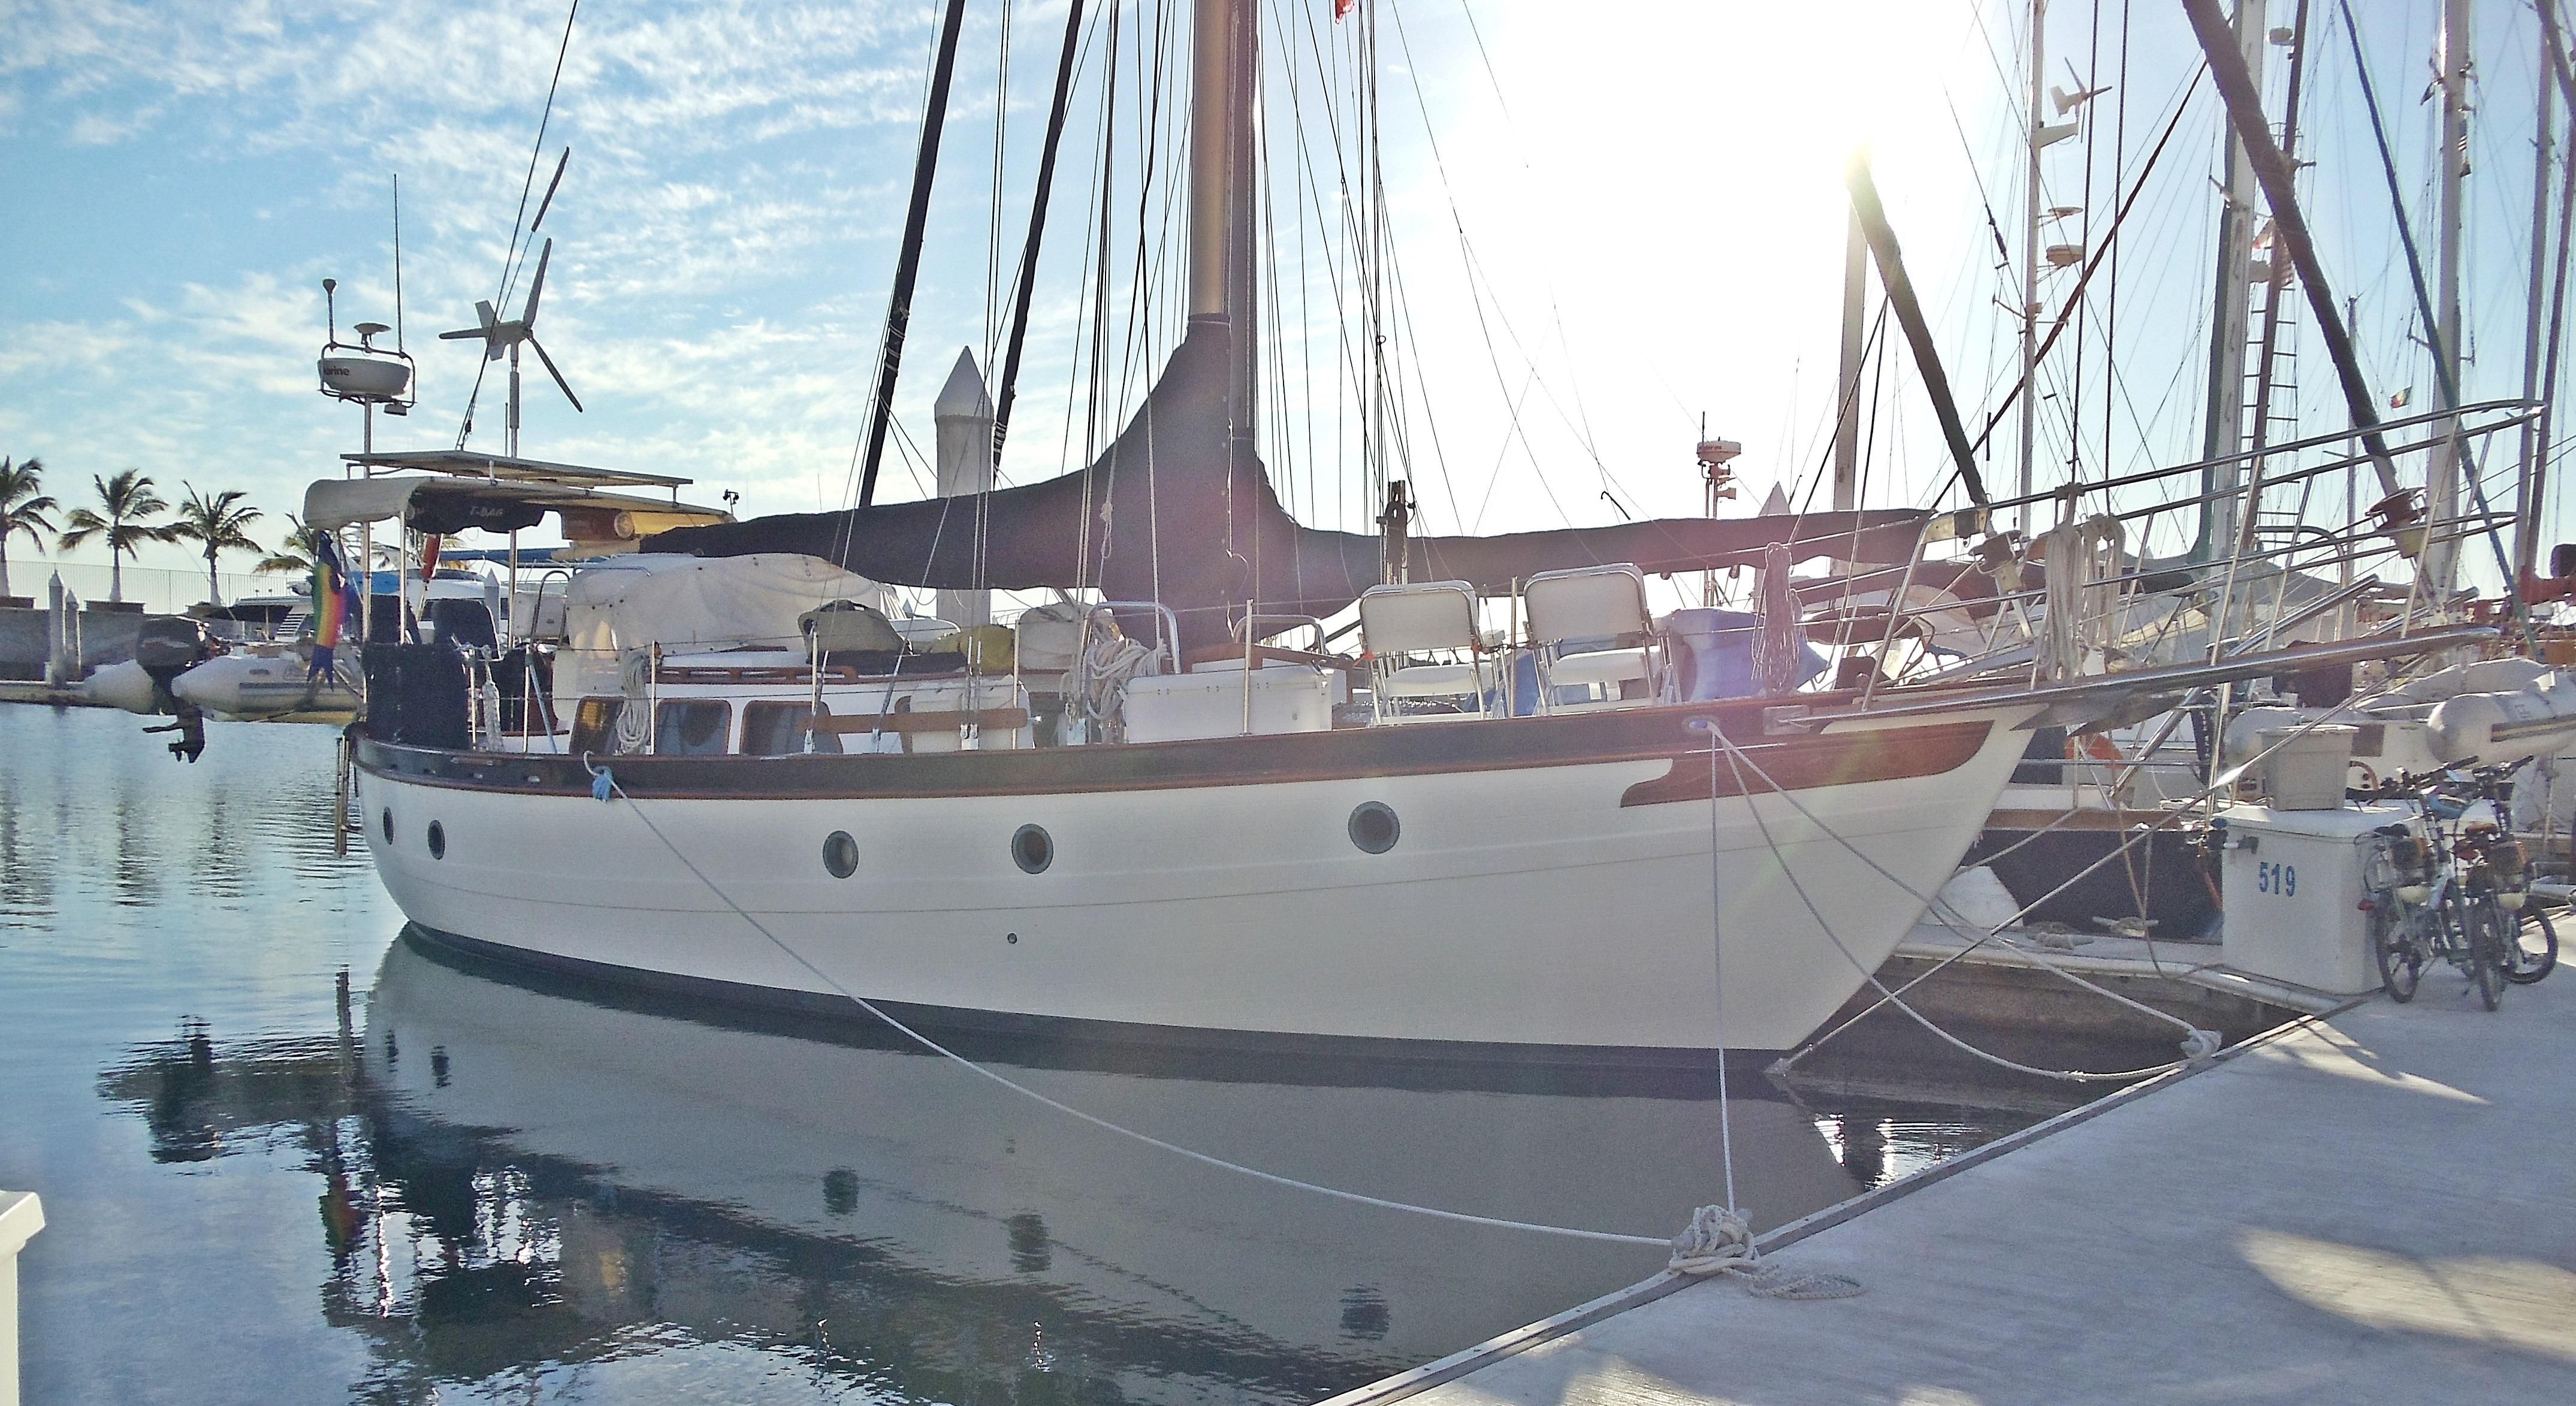 1981 spindrift pilothouse cutter sail boat for sale - www